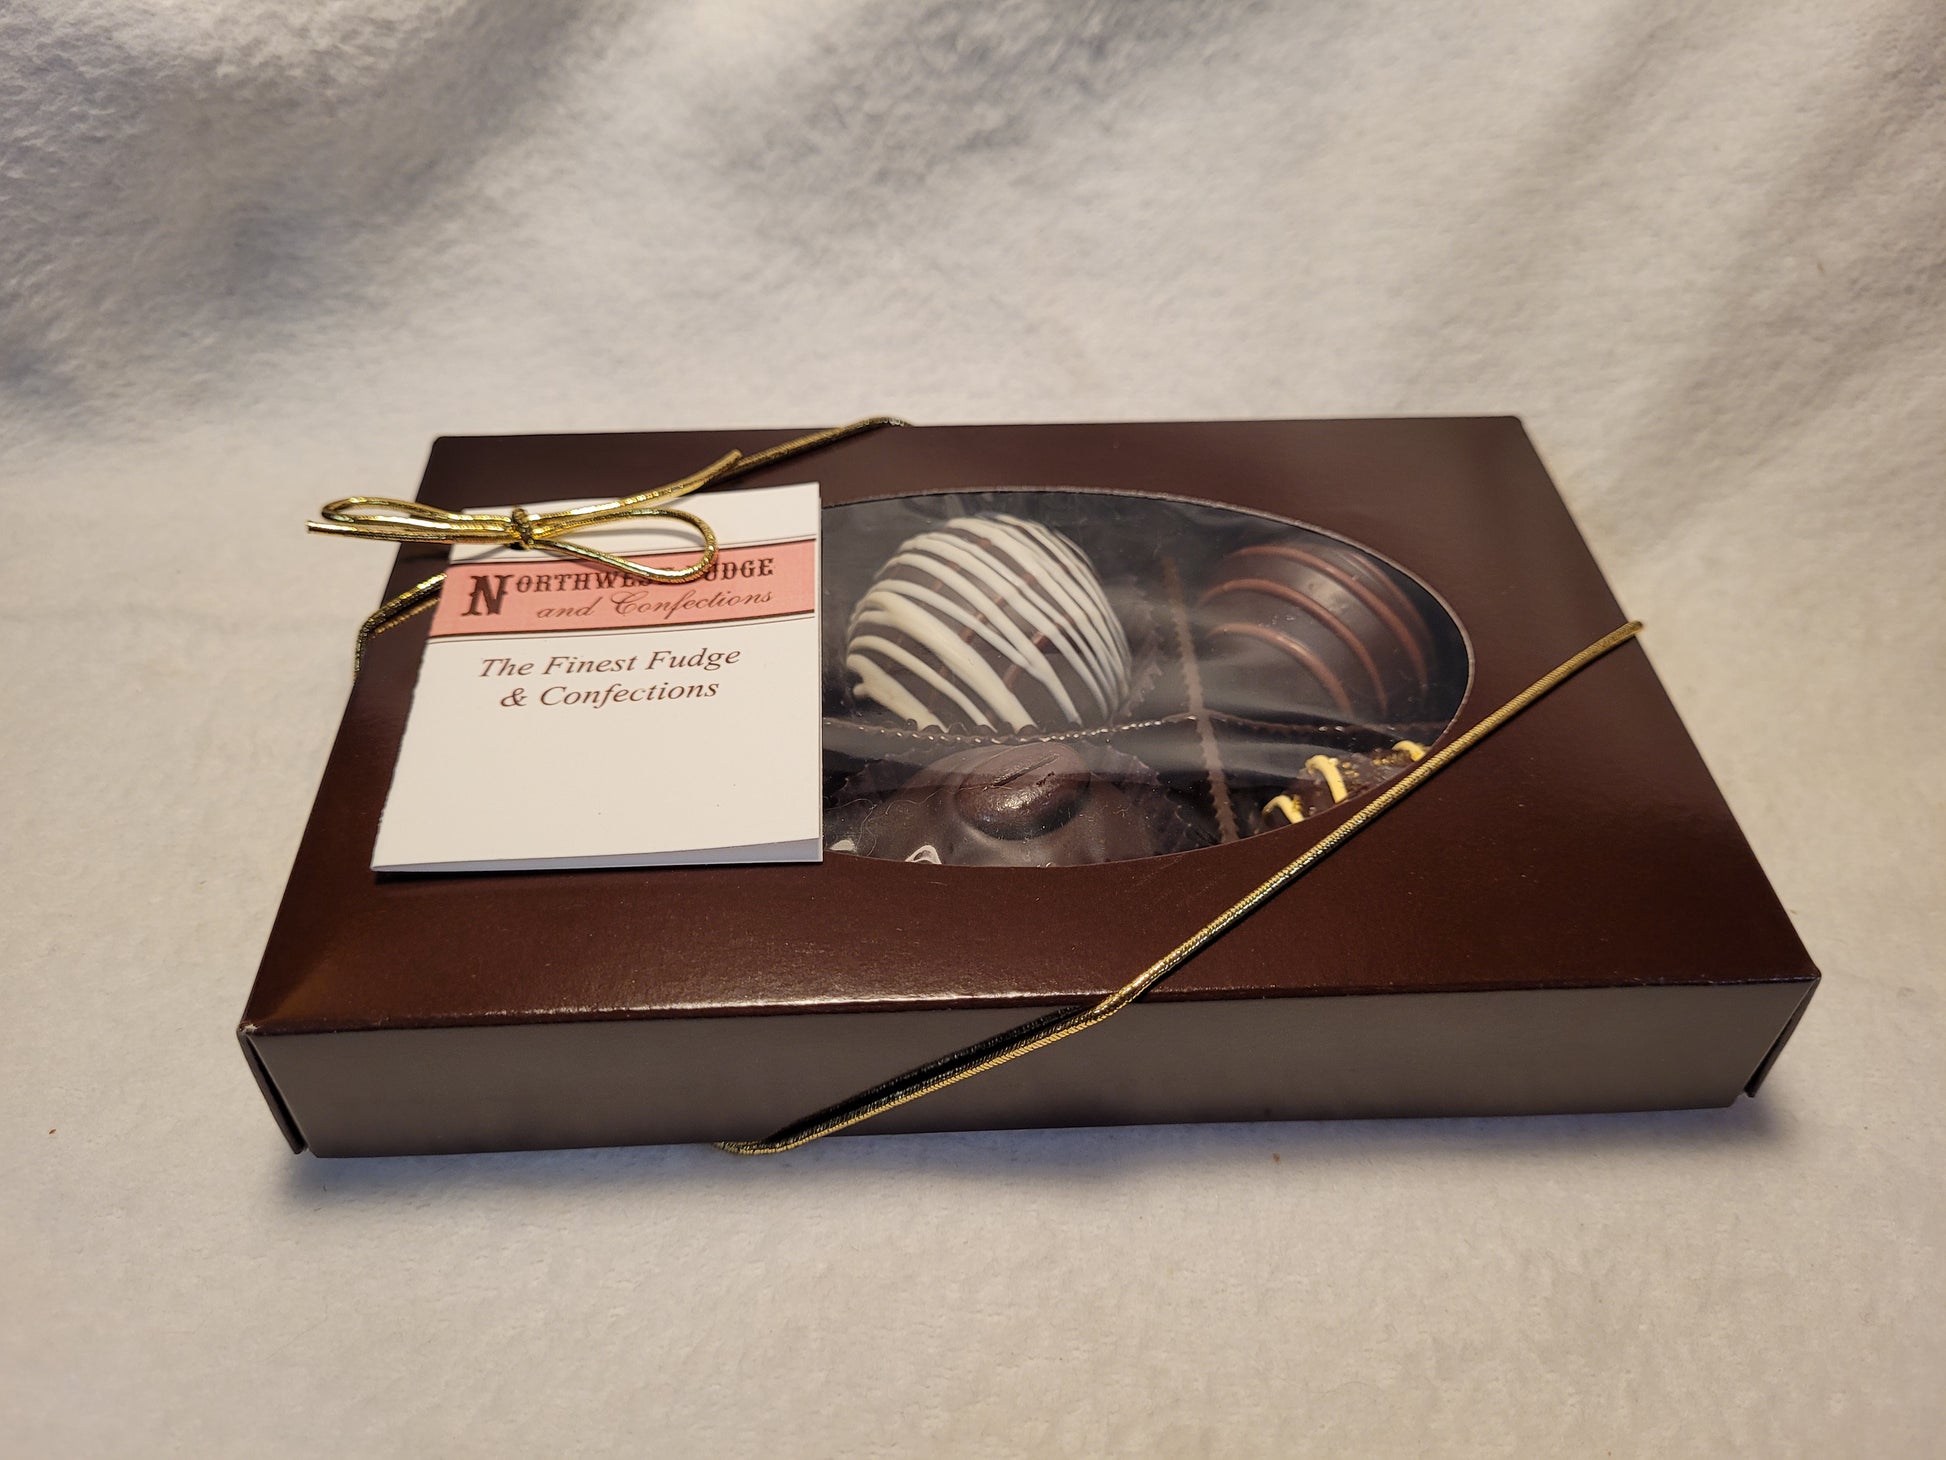 6 Piece gift box of large truffles with strap and card